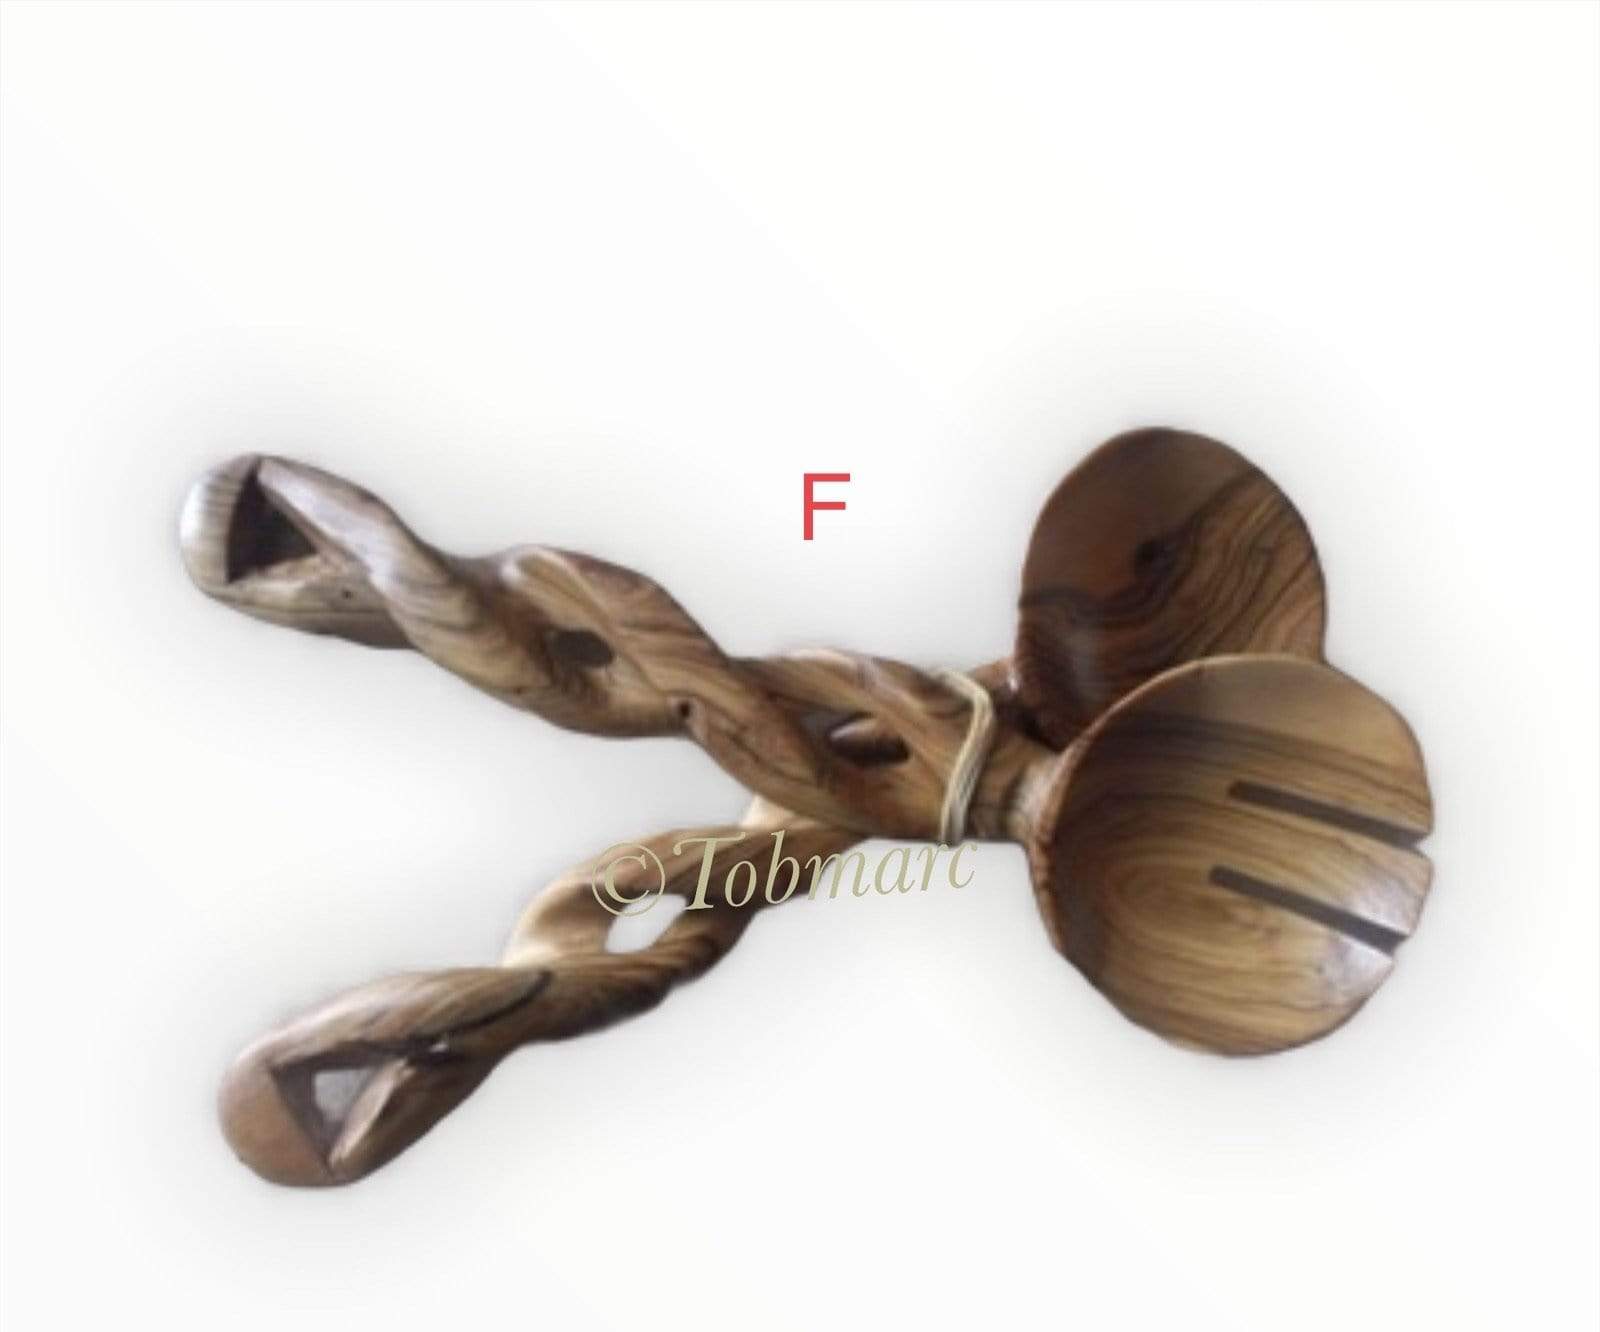 Tobmarc Home Decor & Gifts  Assorted Handcrafted Wood Serving Spoon